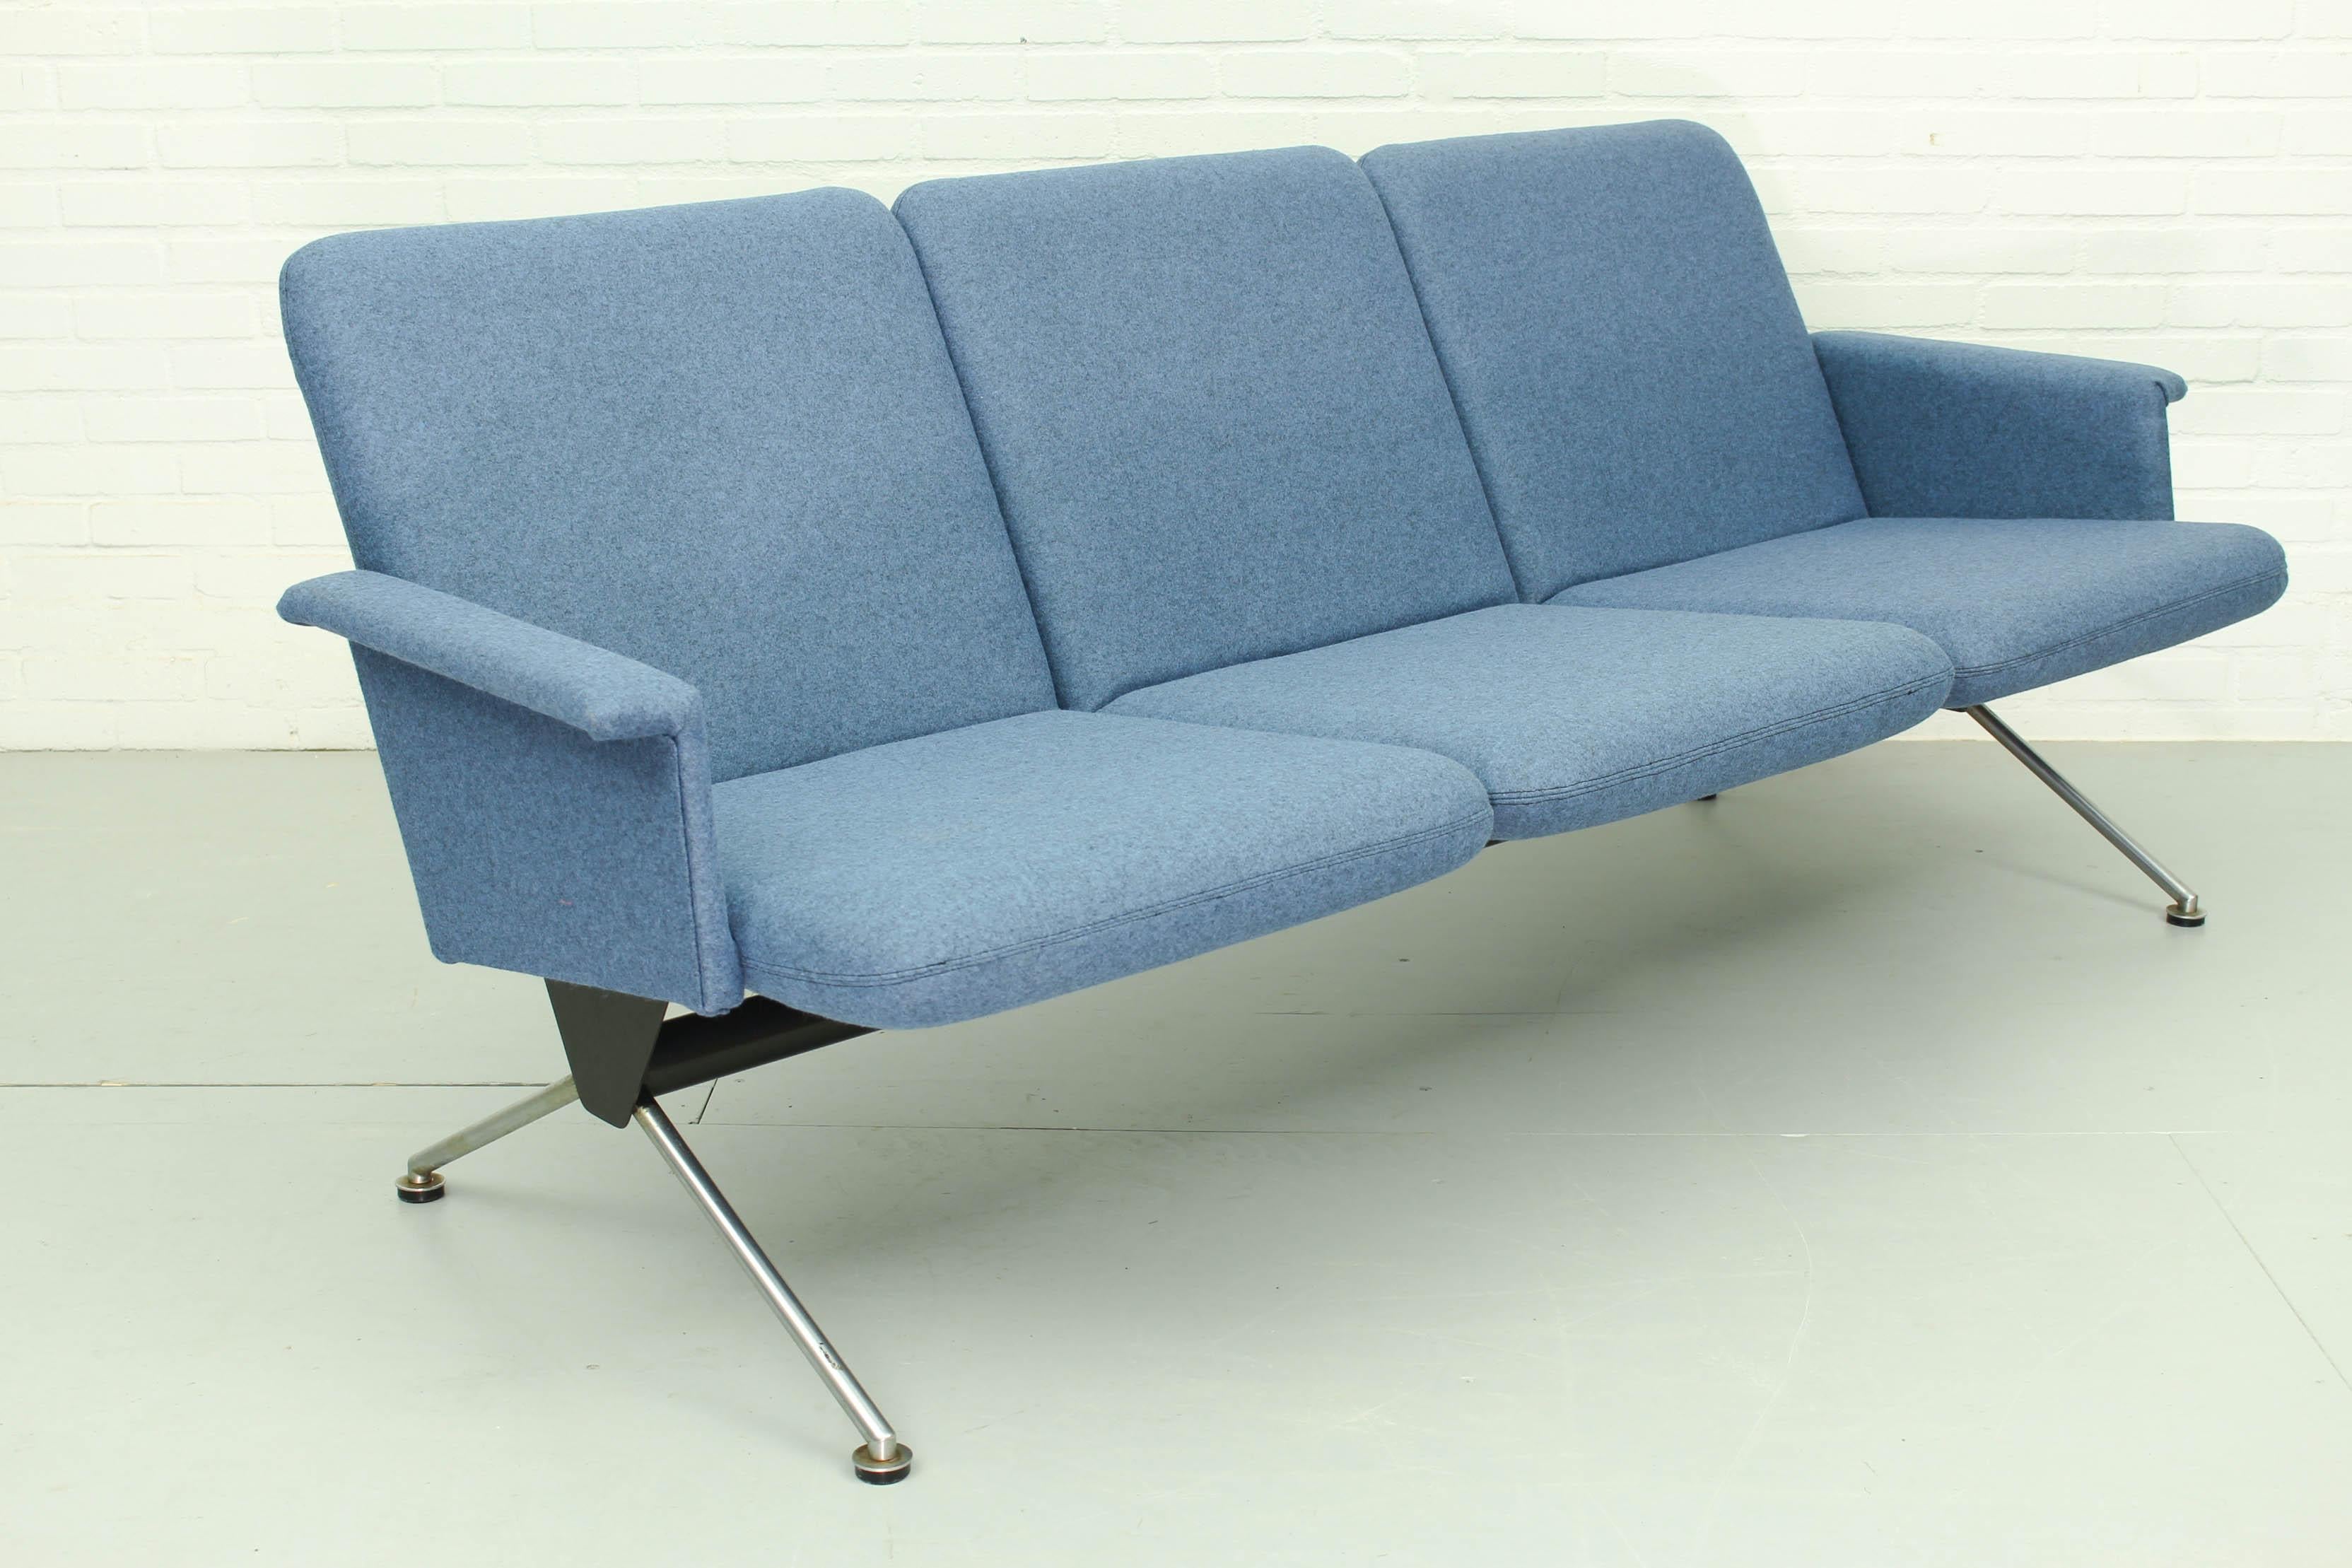 Mid-Century Modern Lounge Set by Andre Cordemeyer for Gispen, 1432 '2x' and 1715, 1961